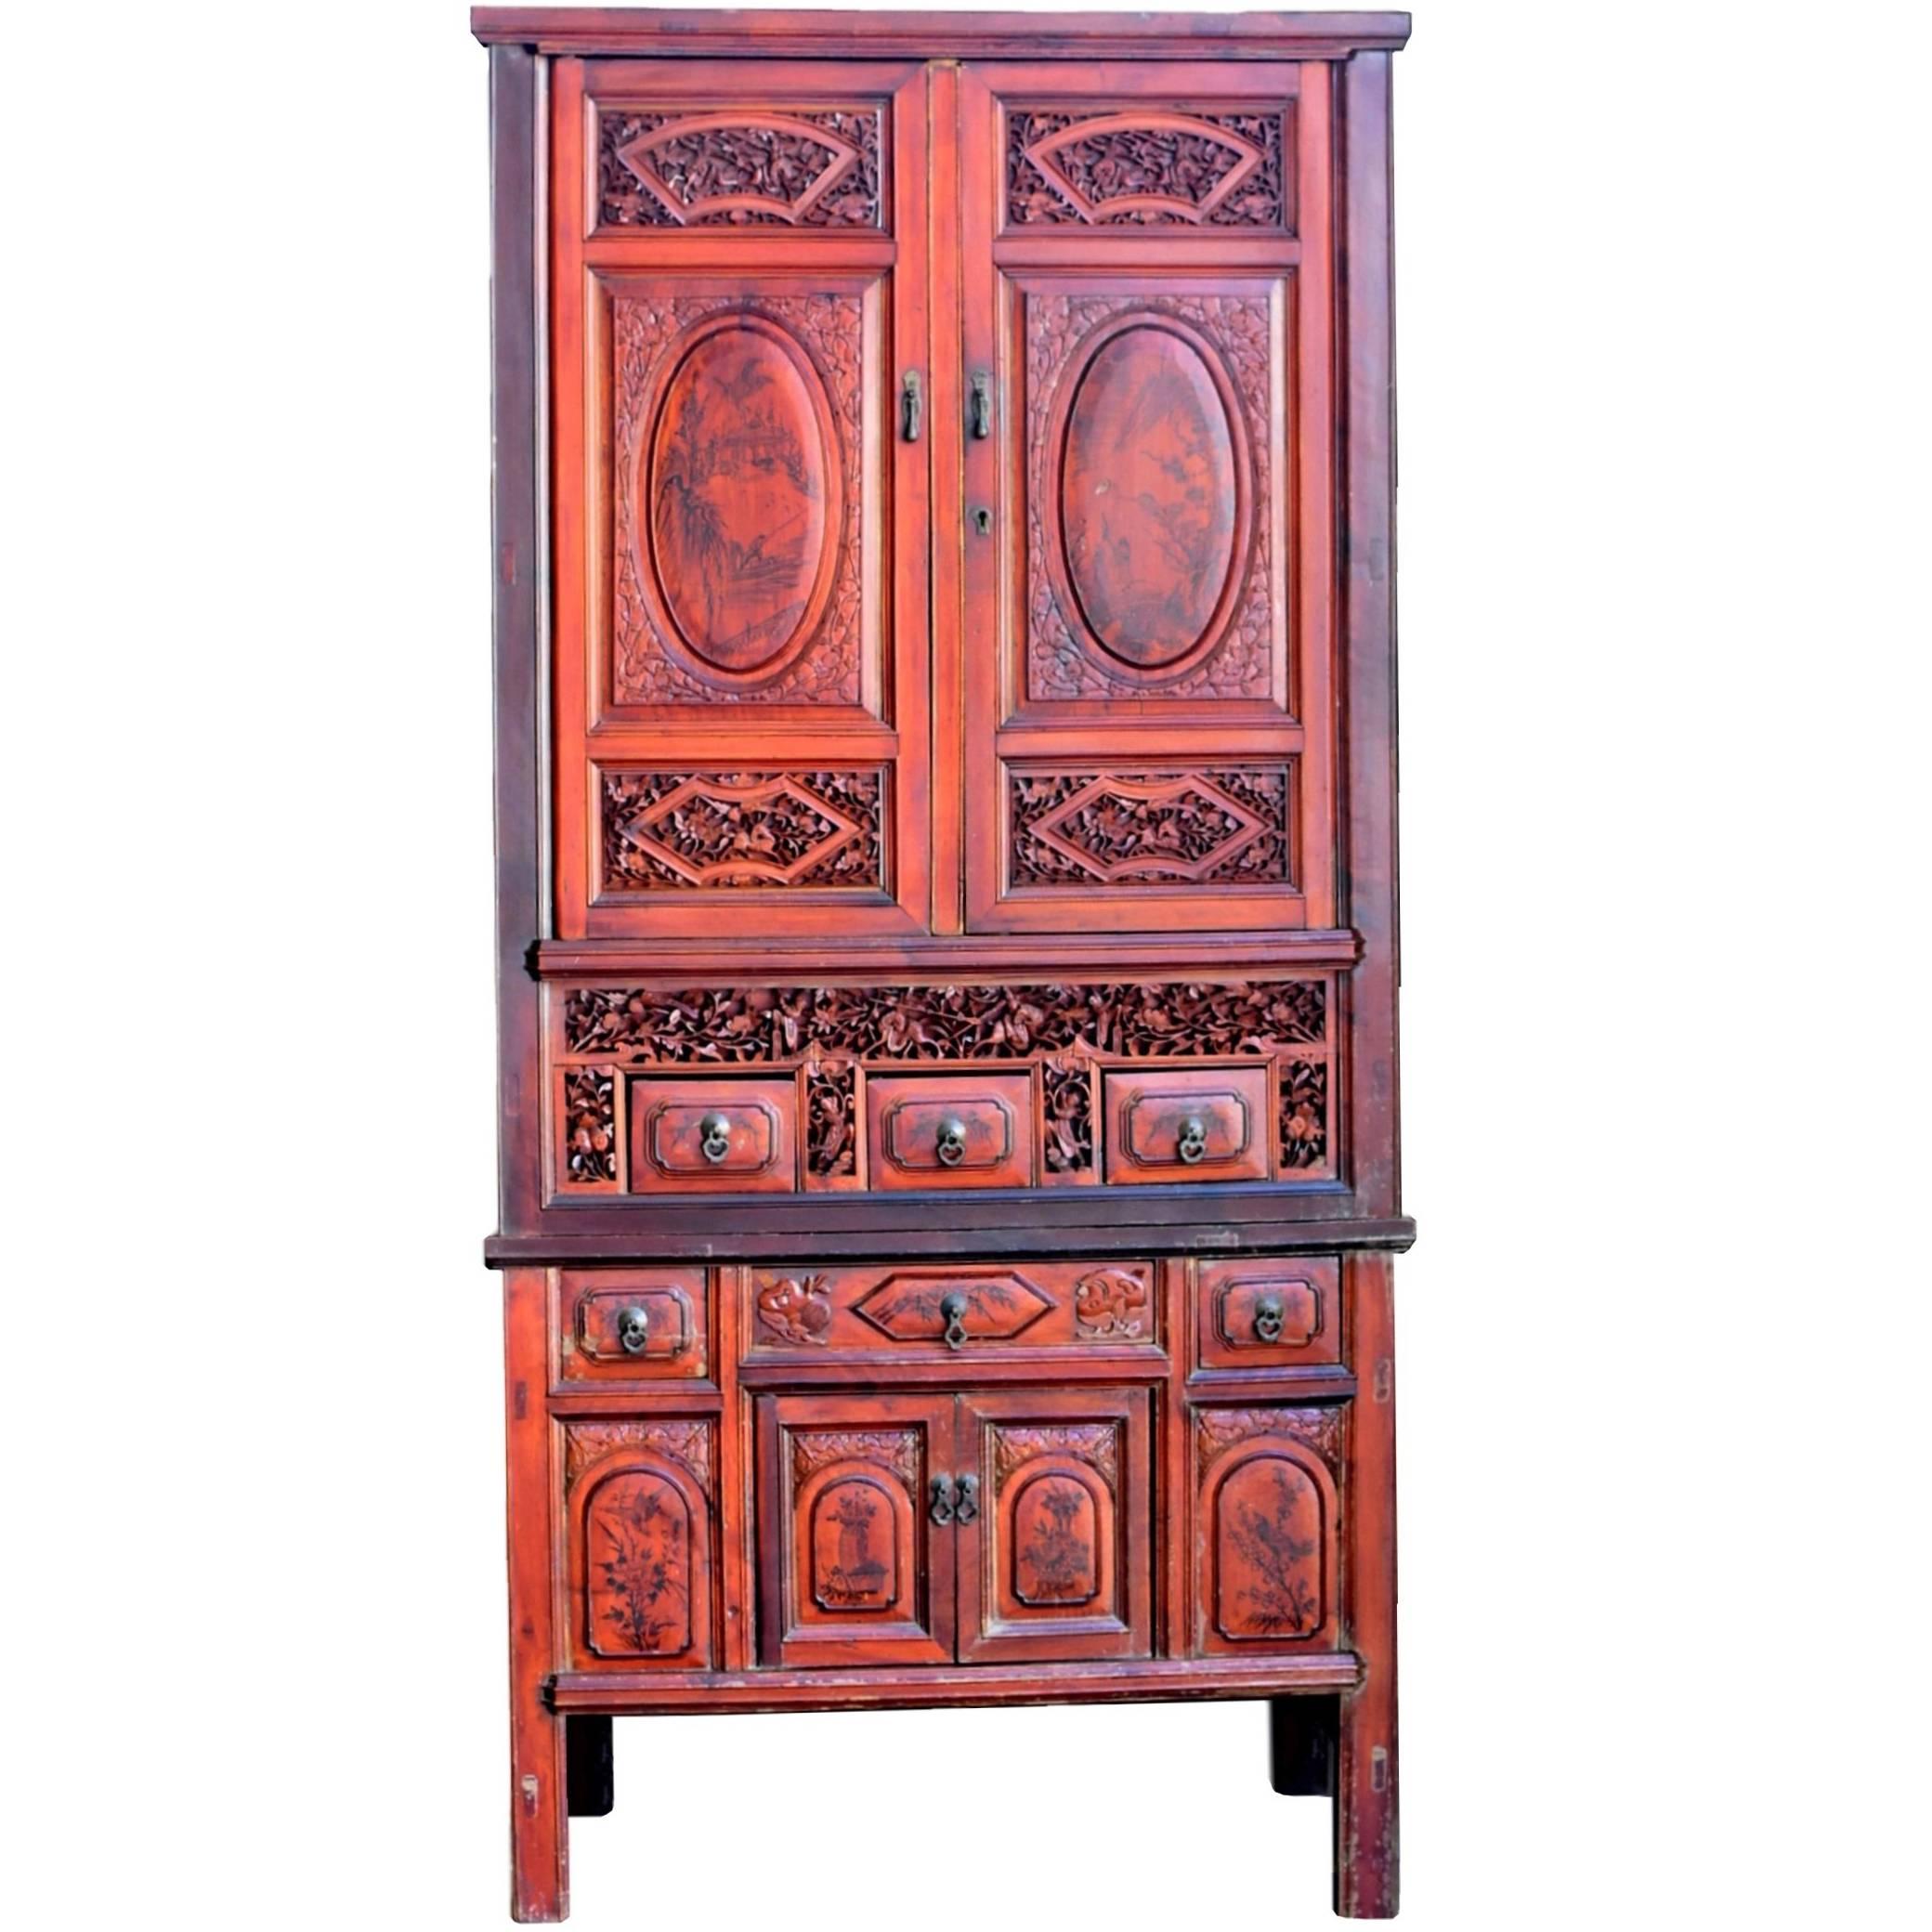 Antique Fully Carved Scholar's Cabinet